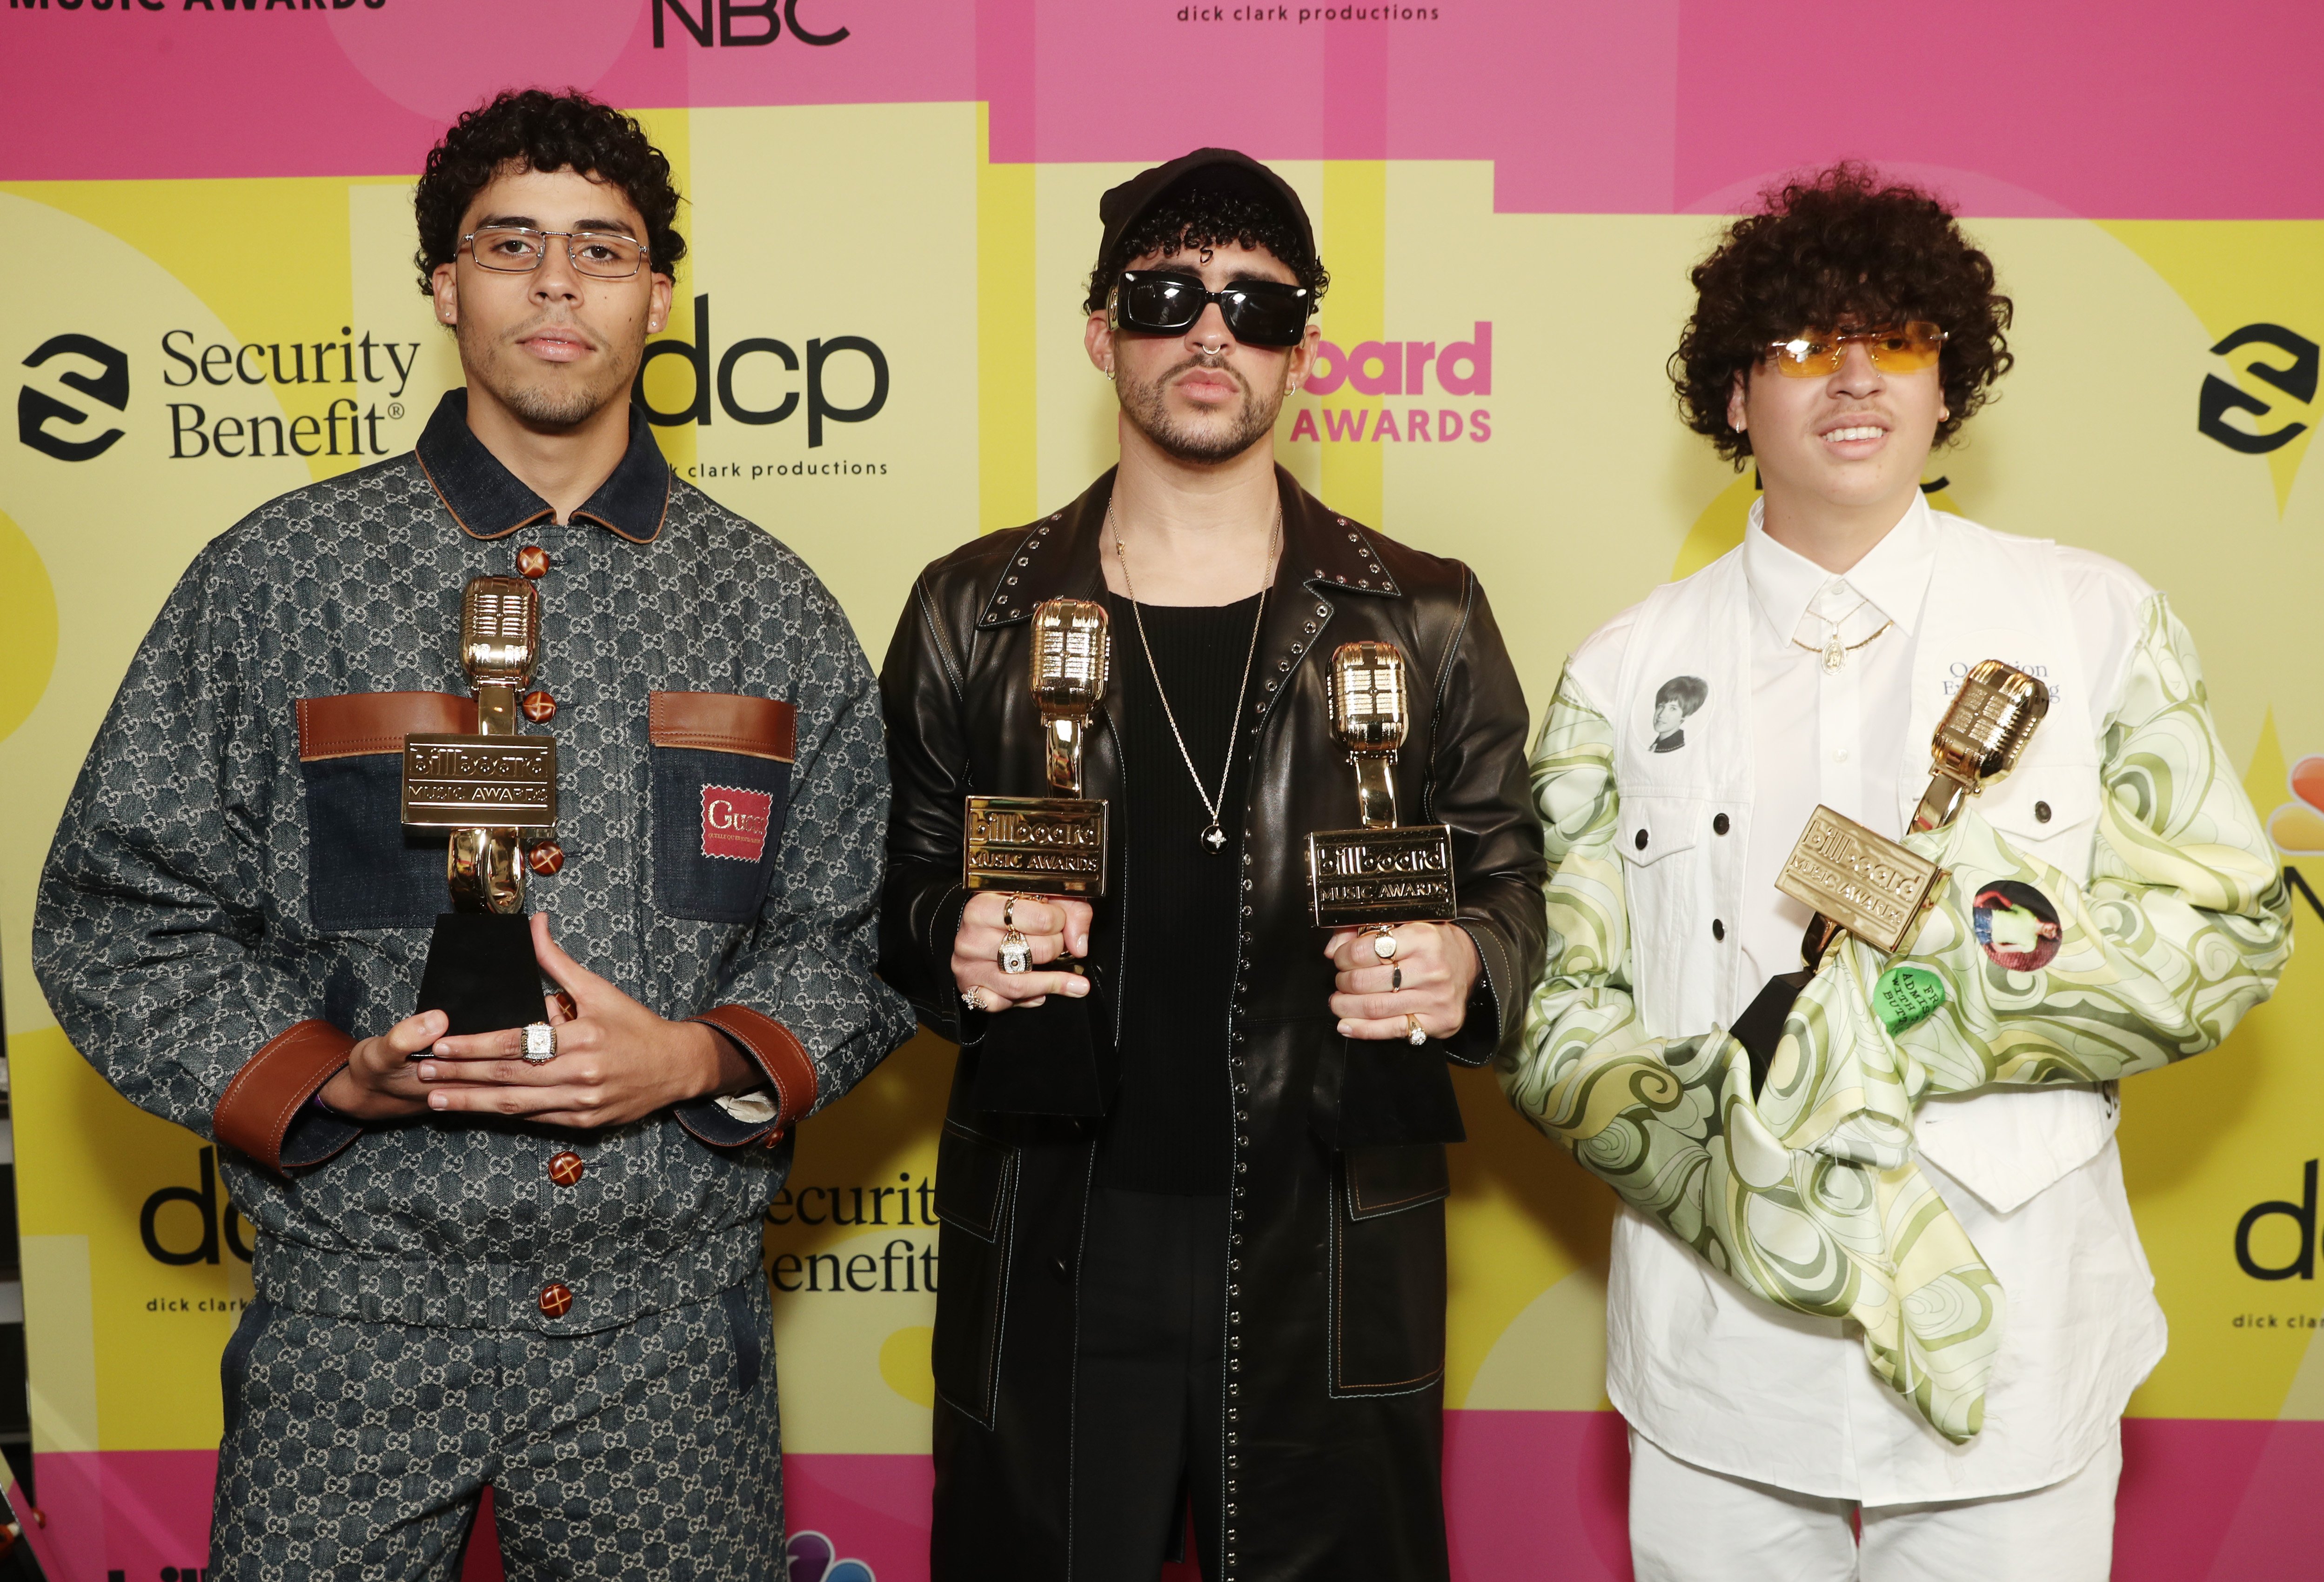 Bad Bunny (C), backstage with his brothers Bernie Martinez (L) and Bysael Martinez (R) at the 2021 Billboard Music Awards held at the Microsoft Theater in LA, California, on May 23, 2021. | Source: Getty Images